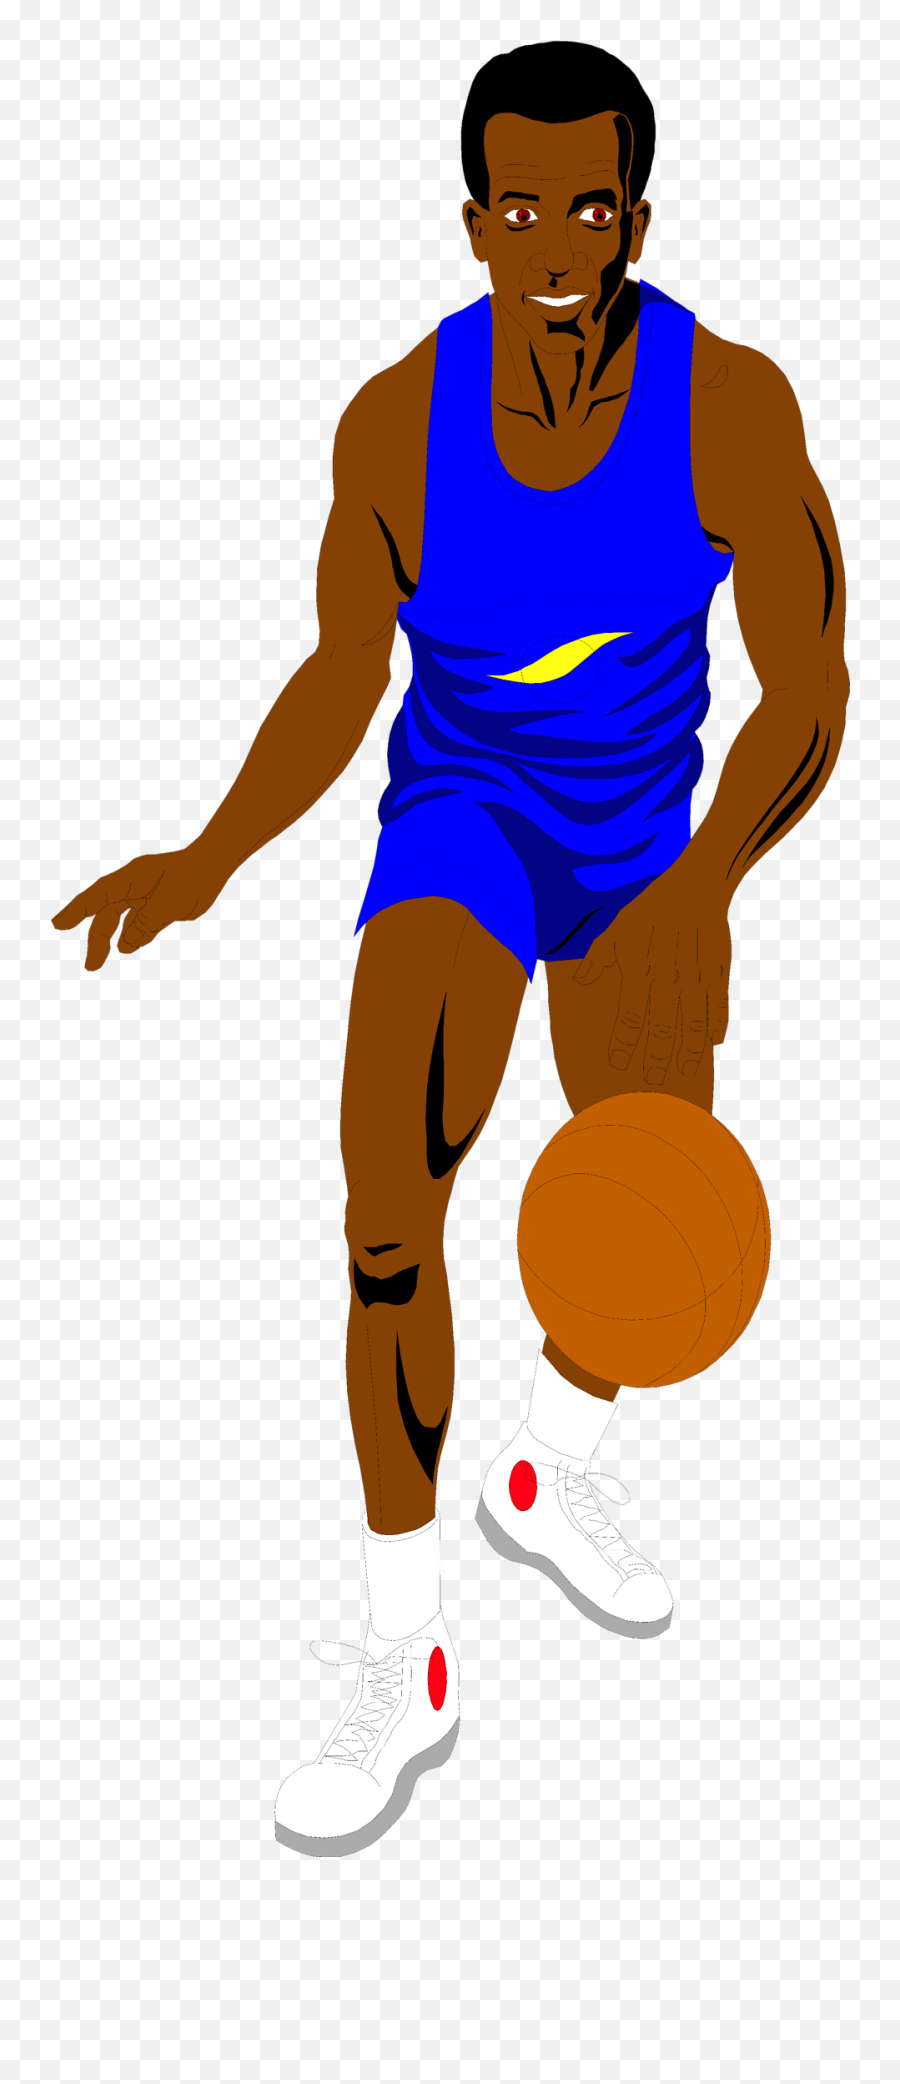 African American No Background - Transparent Transparent Background Clipart Basketball Emoji,Basketball Transparent Background